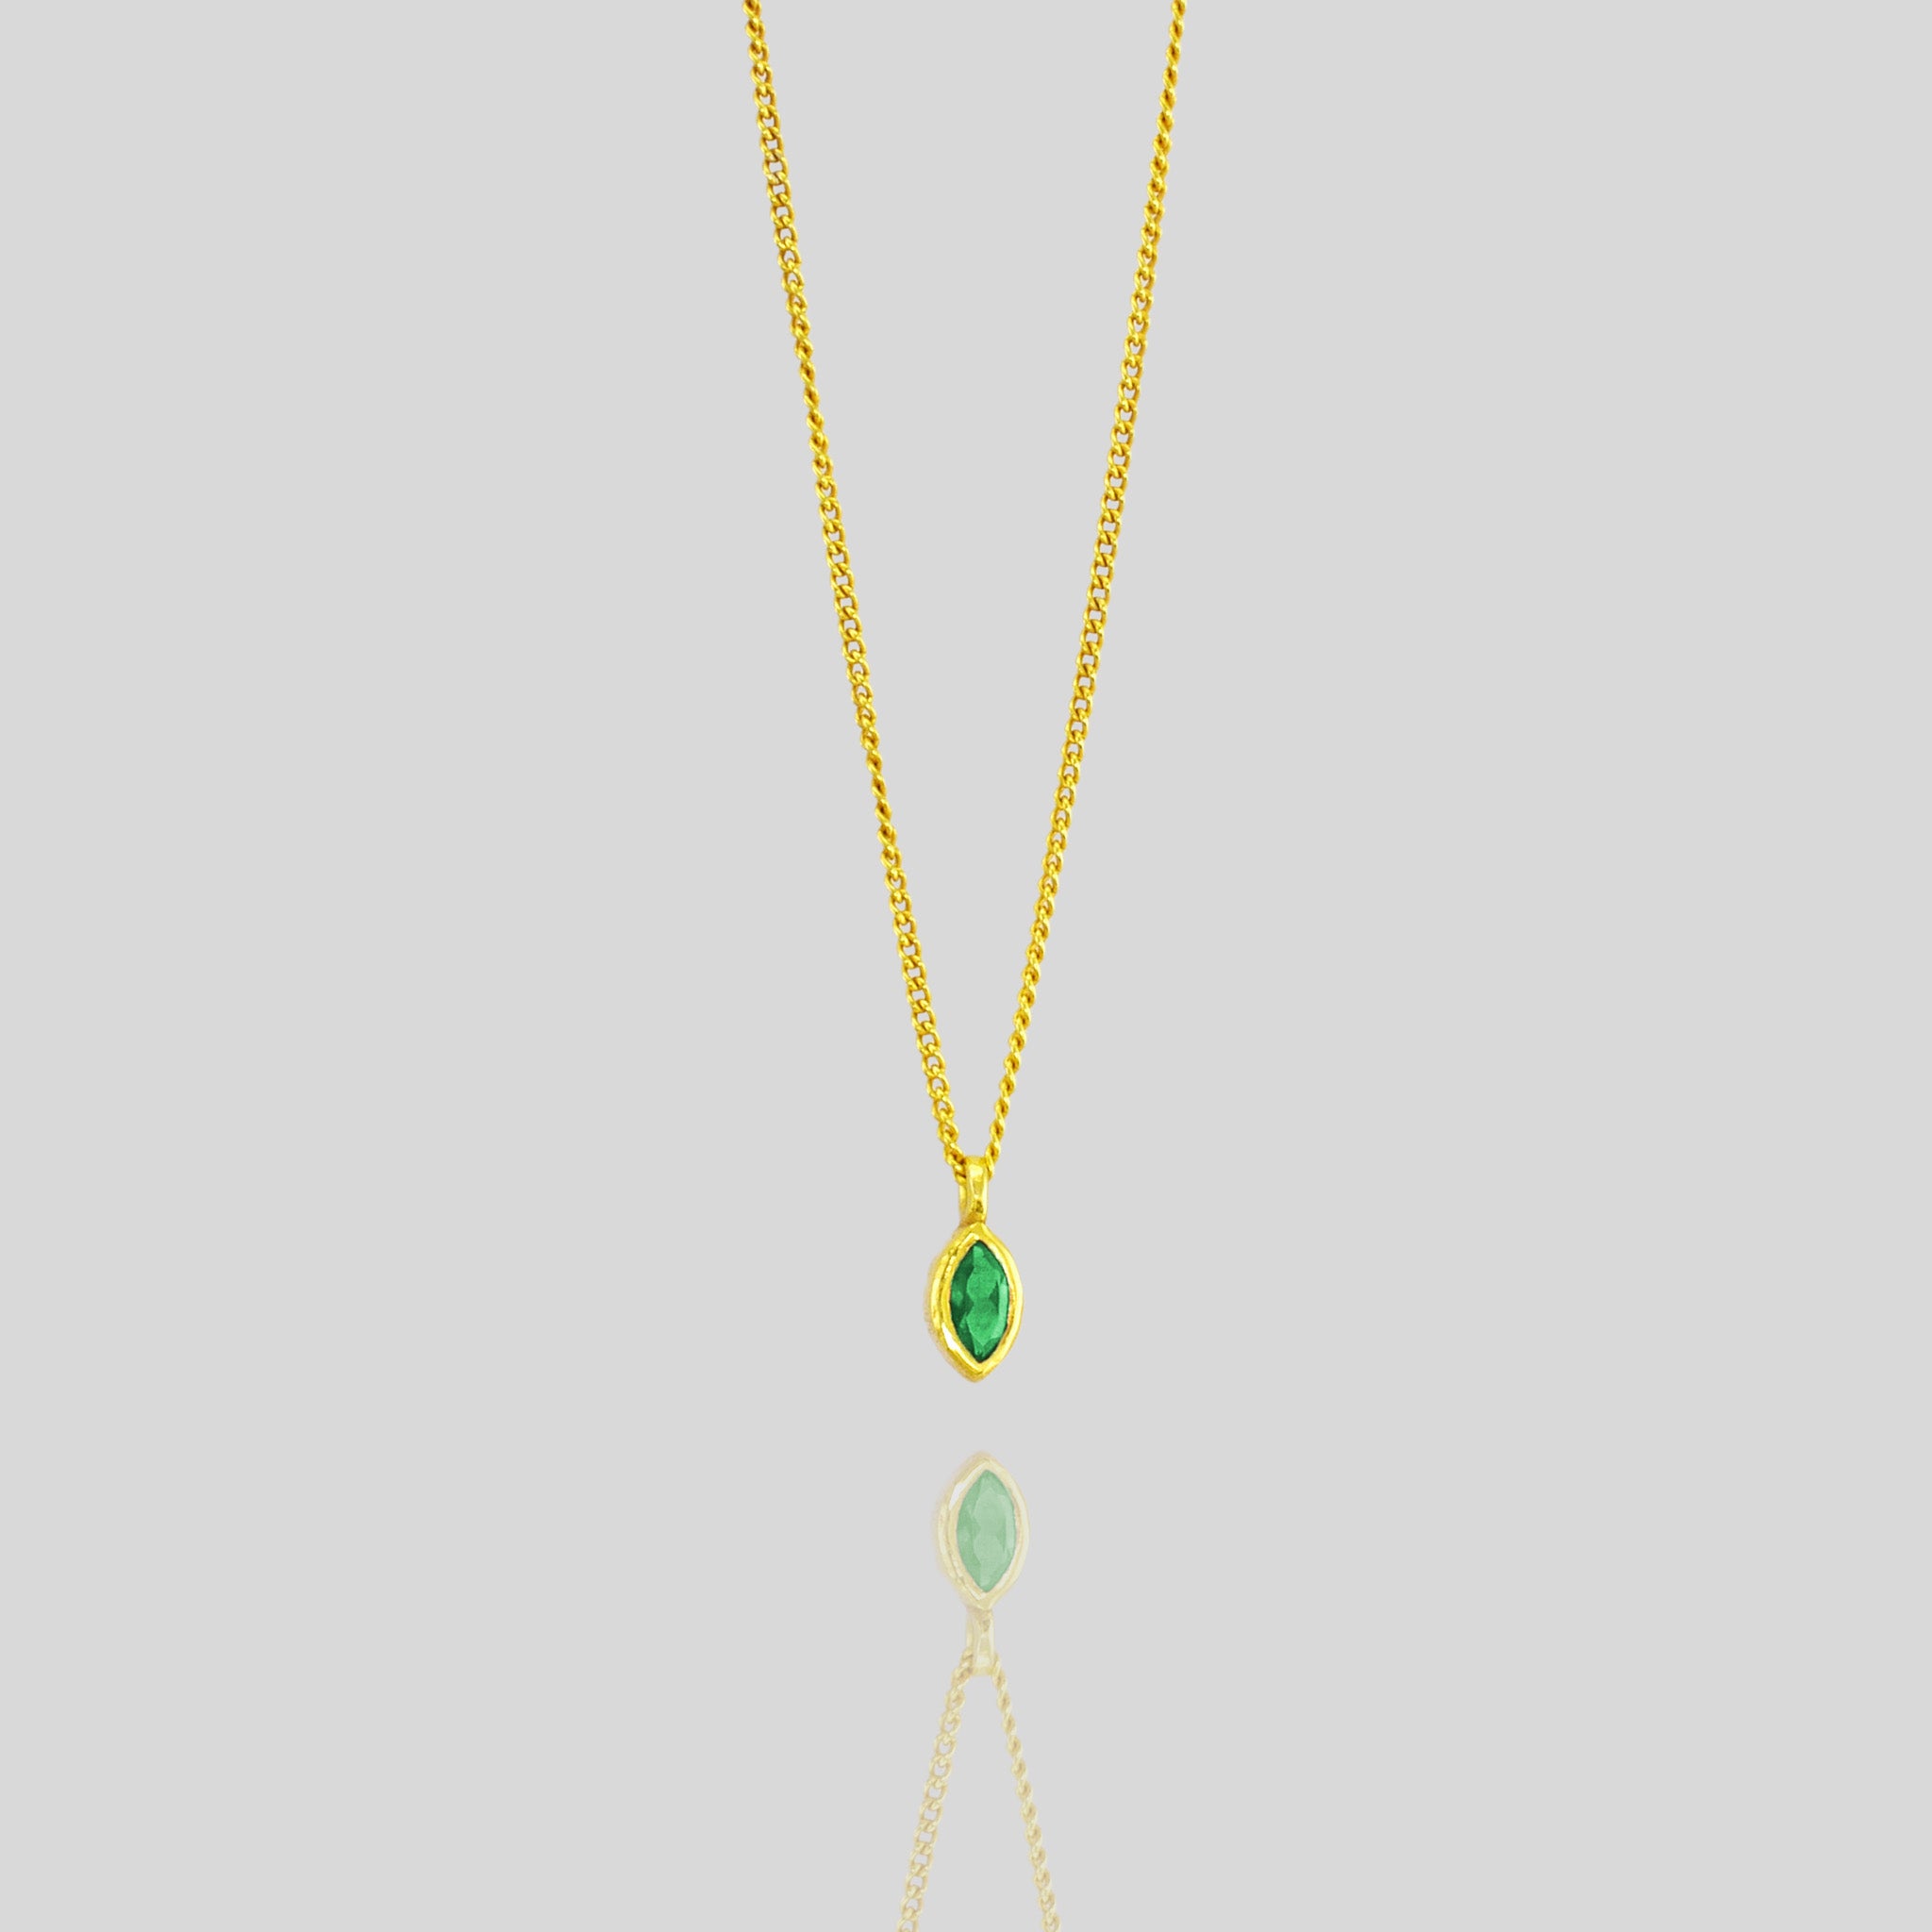 Elegant marquee gold pendant featuring a small, exquisite emerald, adding a delicate touch of vibrant green to enhance any outfit with sophistication.